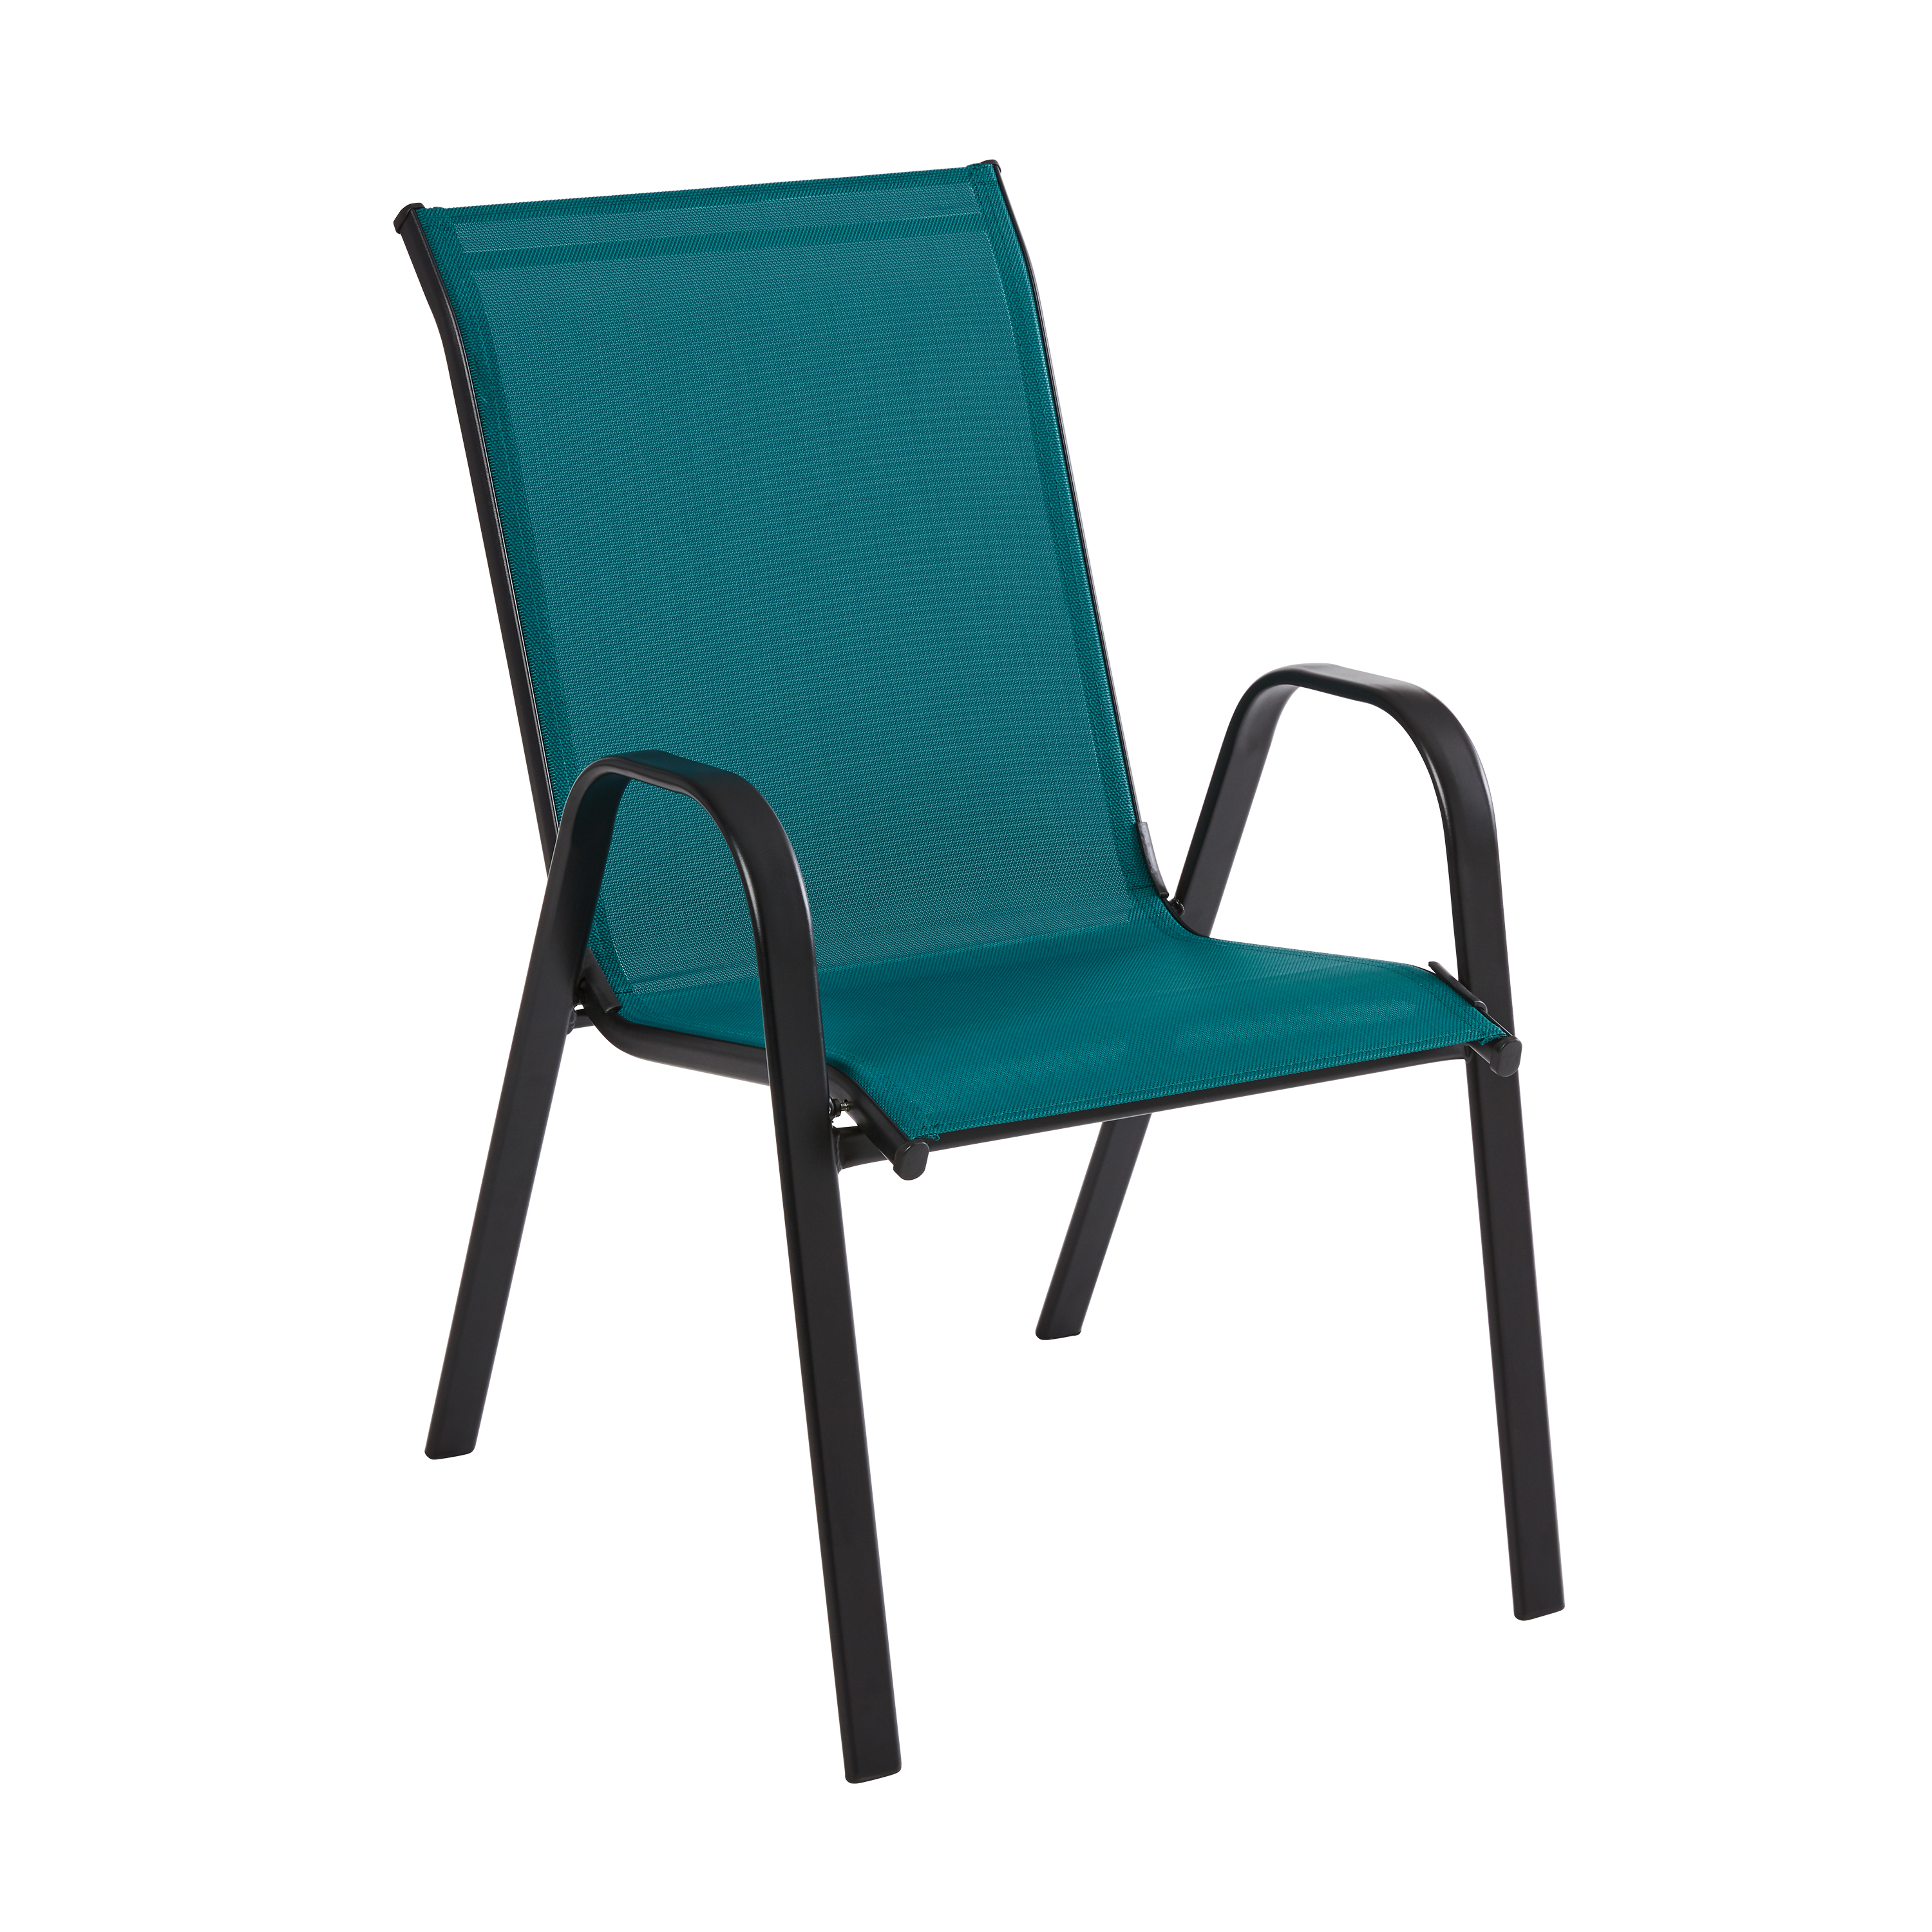 Mainstays Heritage Park Steel Stacking Chair, Teal - image 1 of 9